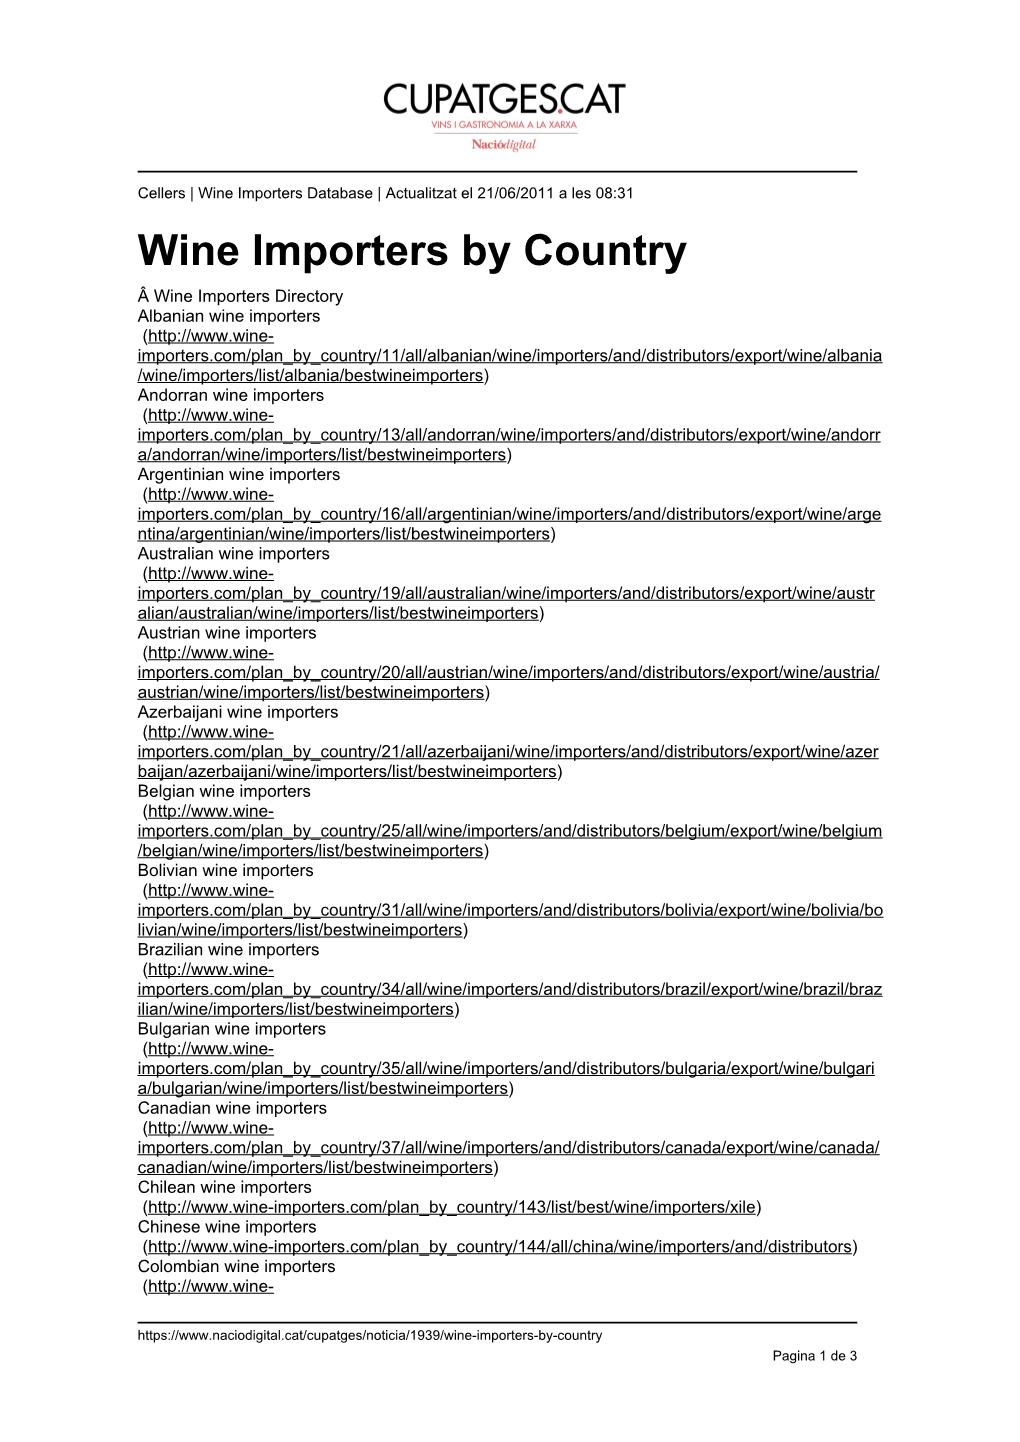 Wine Importers by Country